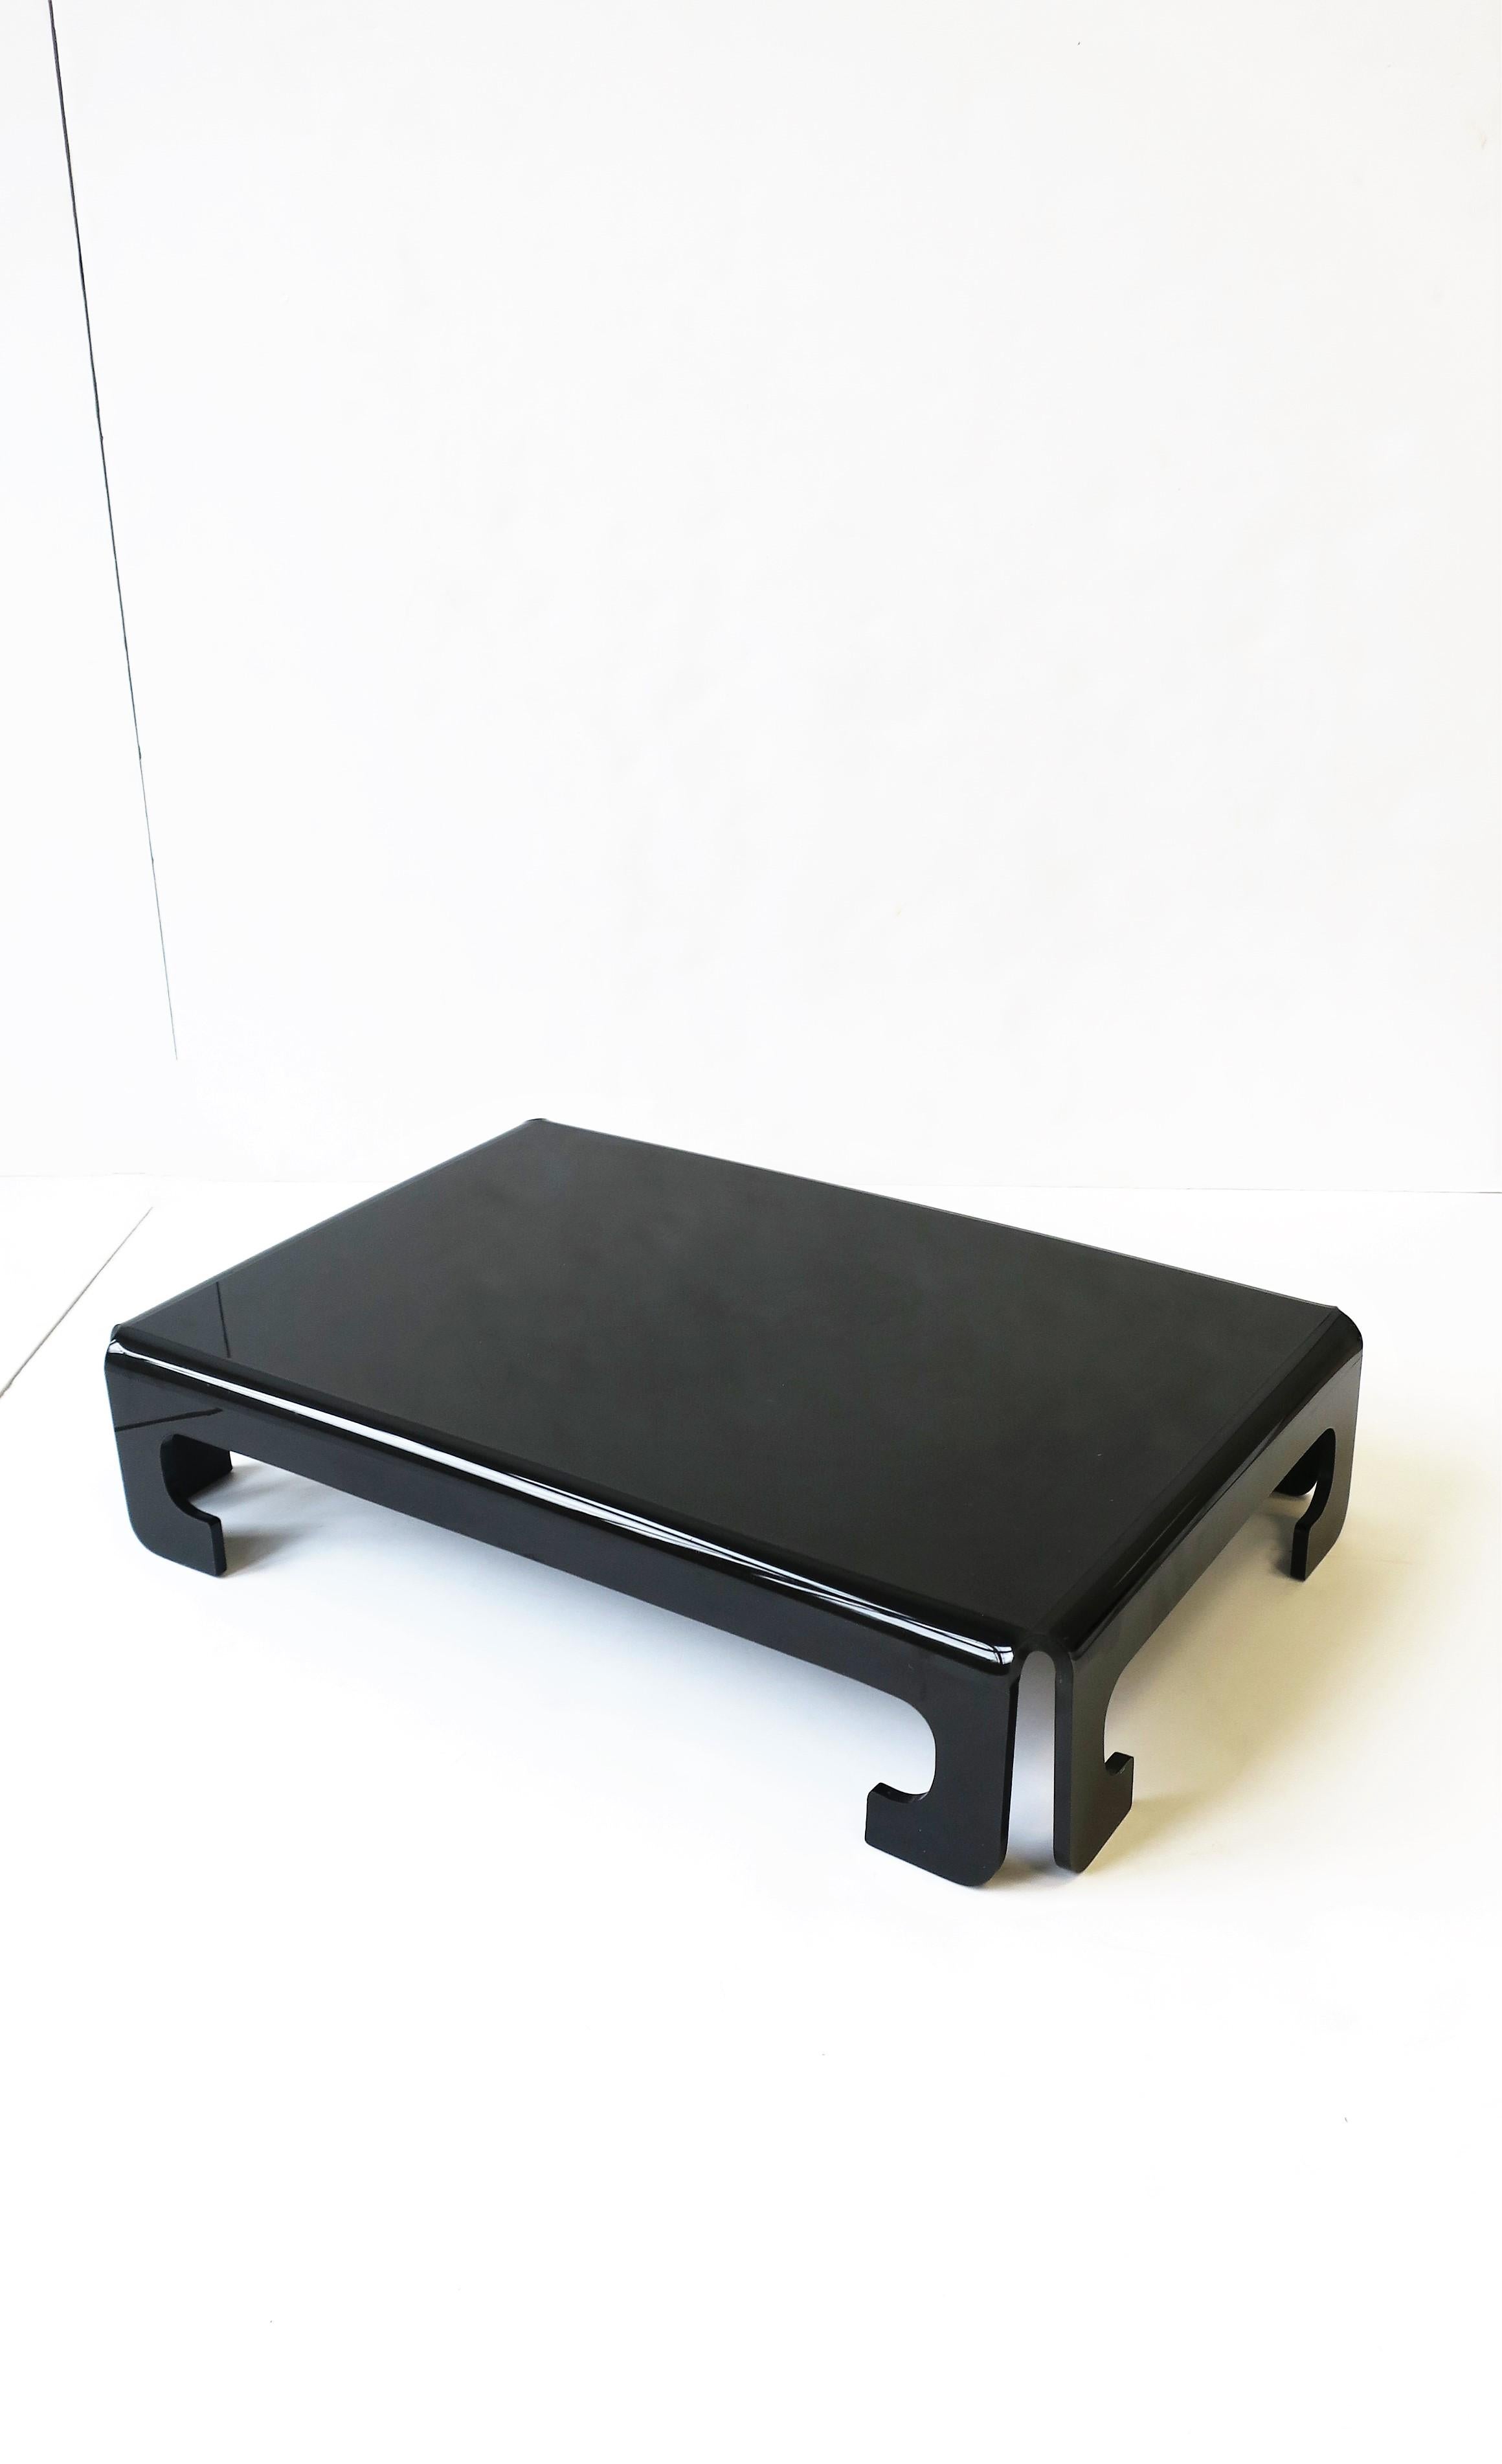 A jet-black acrylic tray or portable elevated shelf, circa late-20th century. In the modern Chinoiserie design style.

Dimensions: 12.38